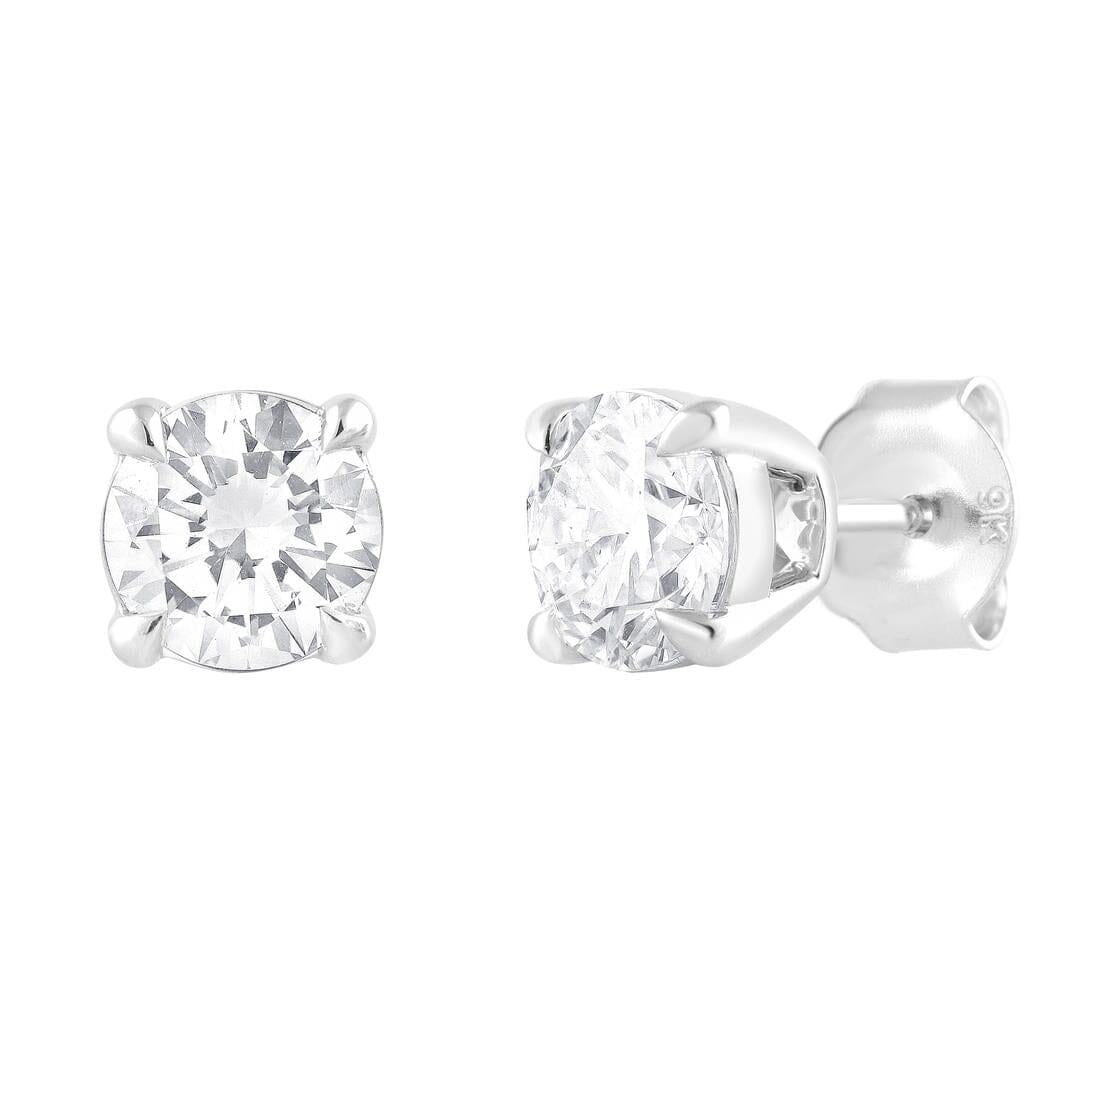 Meera 2.00ct Laboratory Grown Solitaire Diamond Earrings in 9ct White Gold Earrings Bevilles 